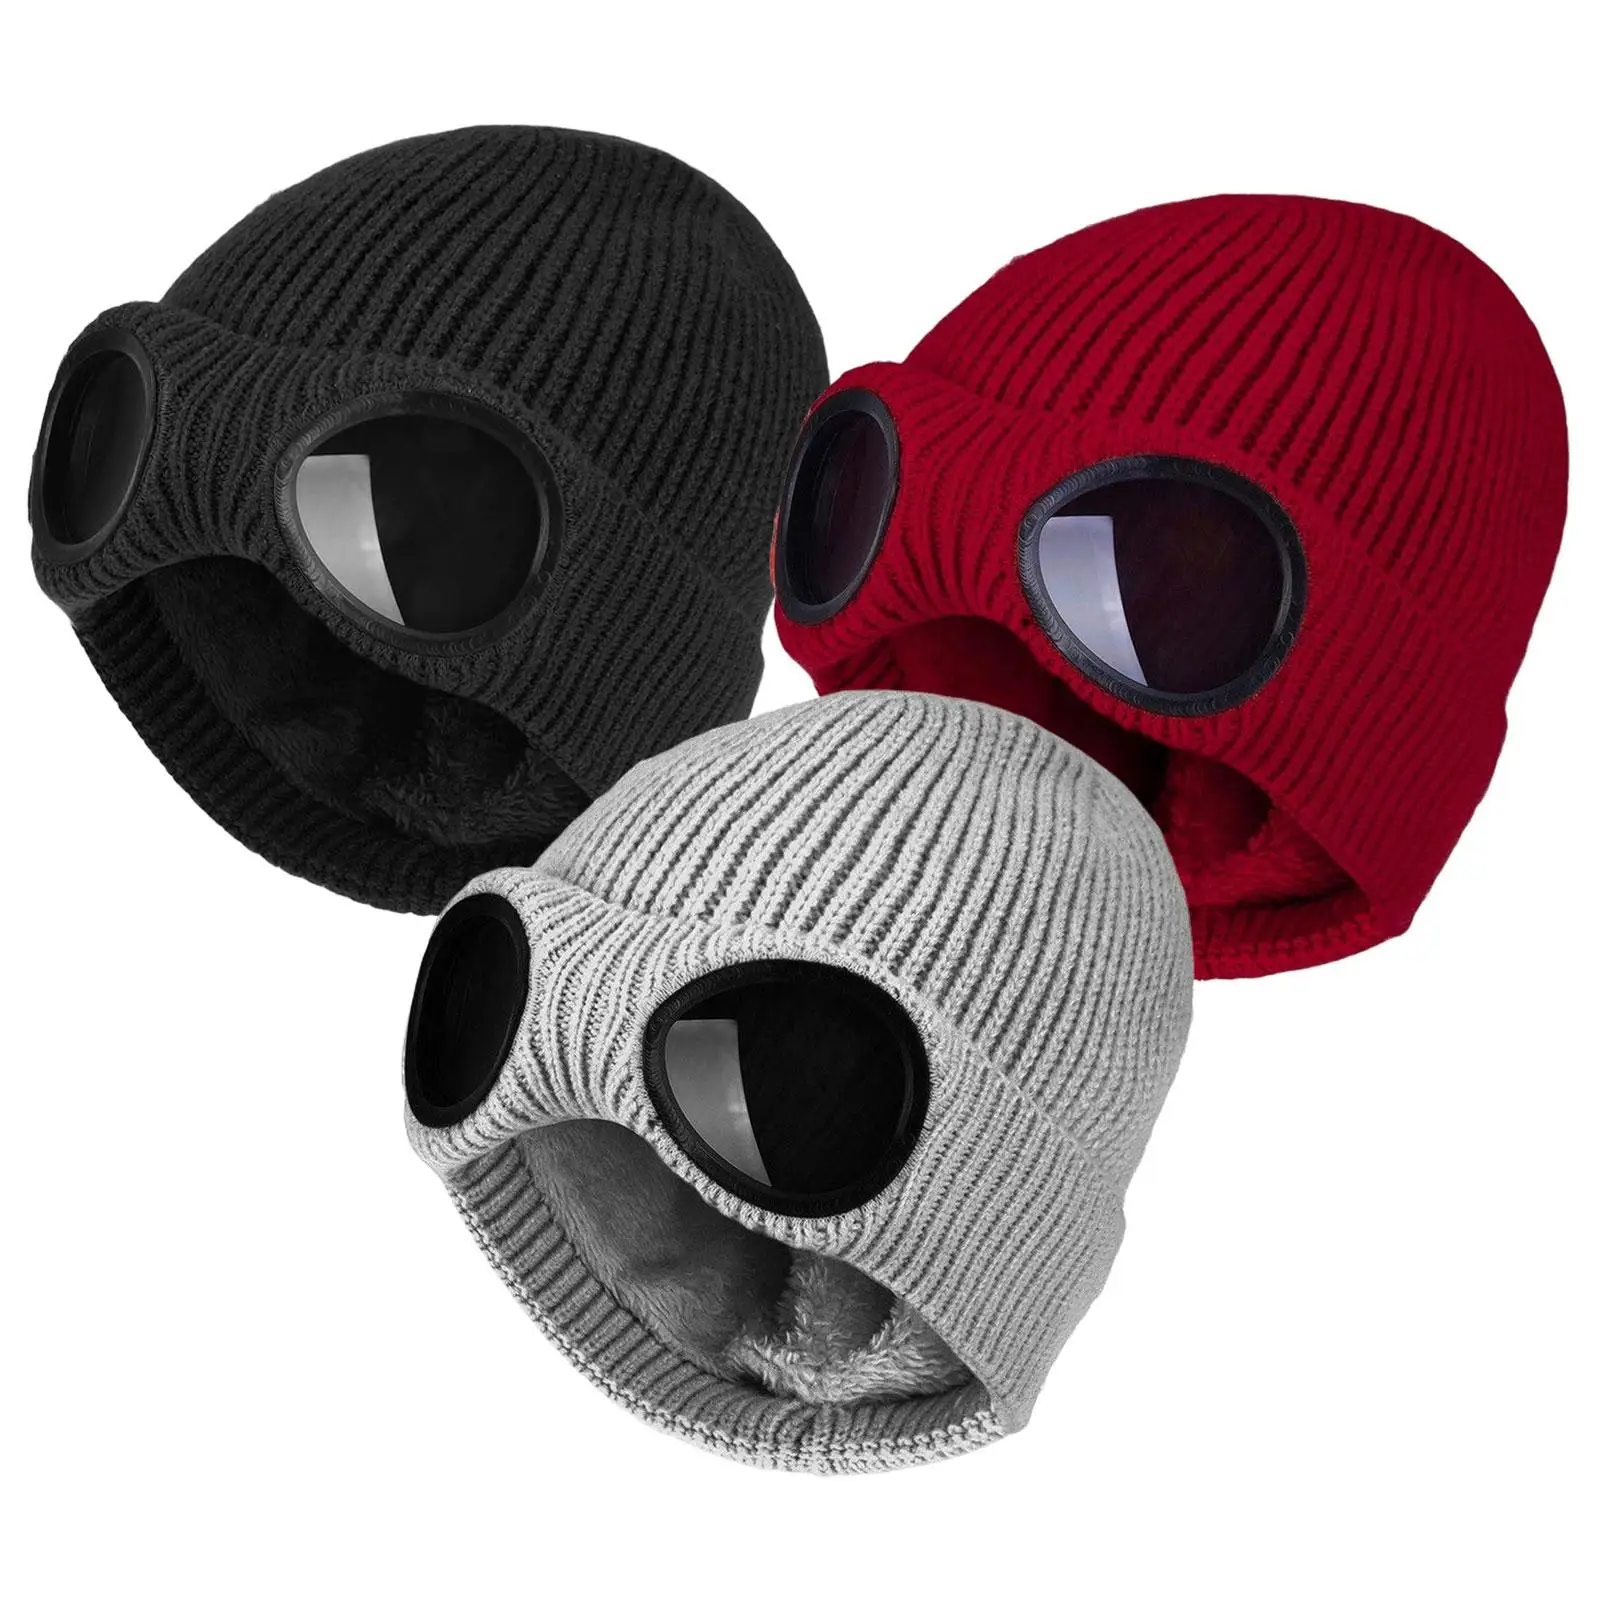 Fashion Knit Hats Thermal Solid Color Beanie, with Goggles Windproof Soft Headwear Skiing Caps for Men Women Unisex